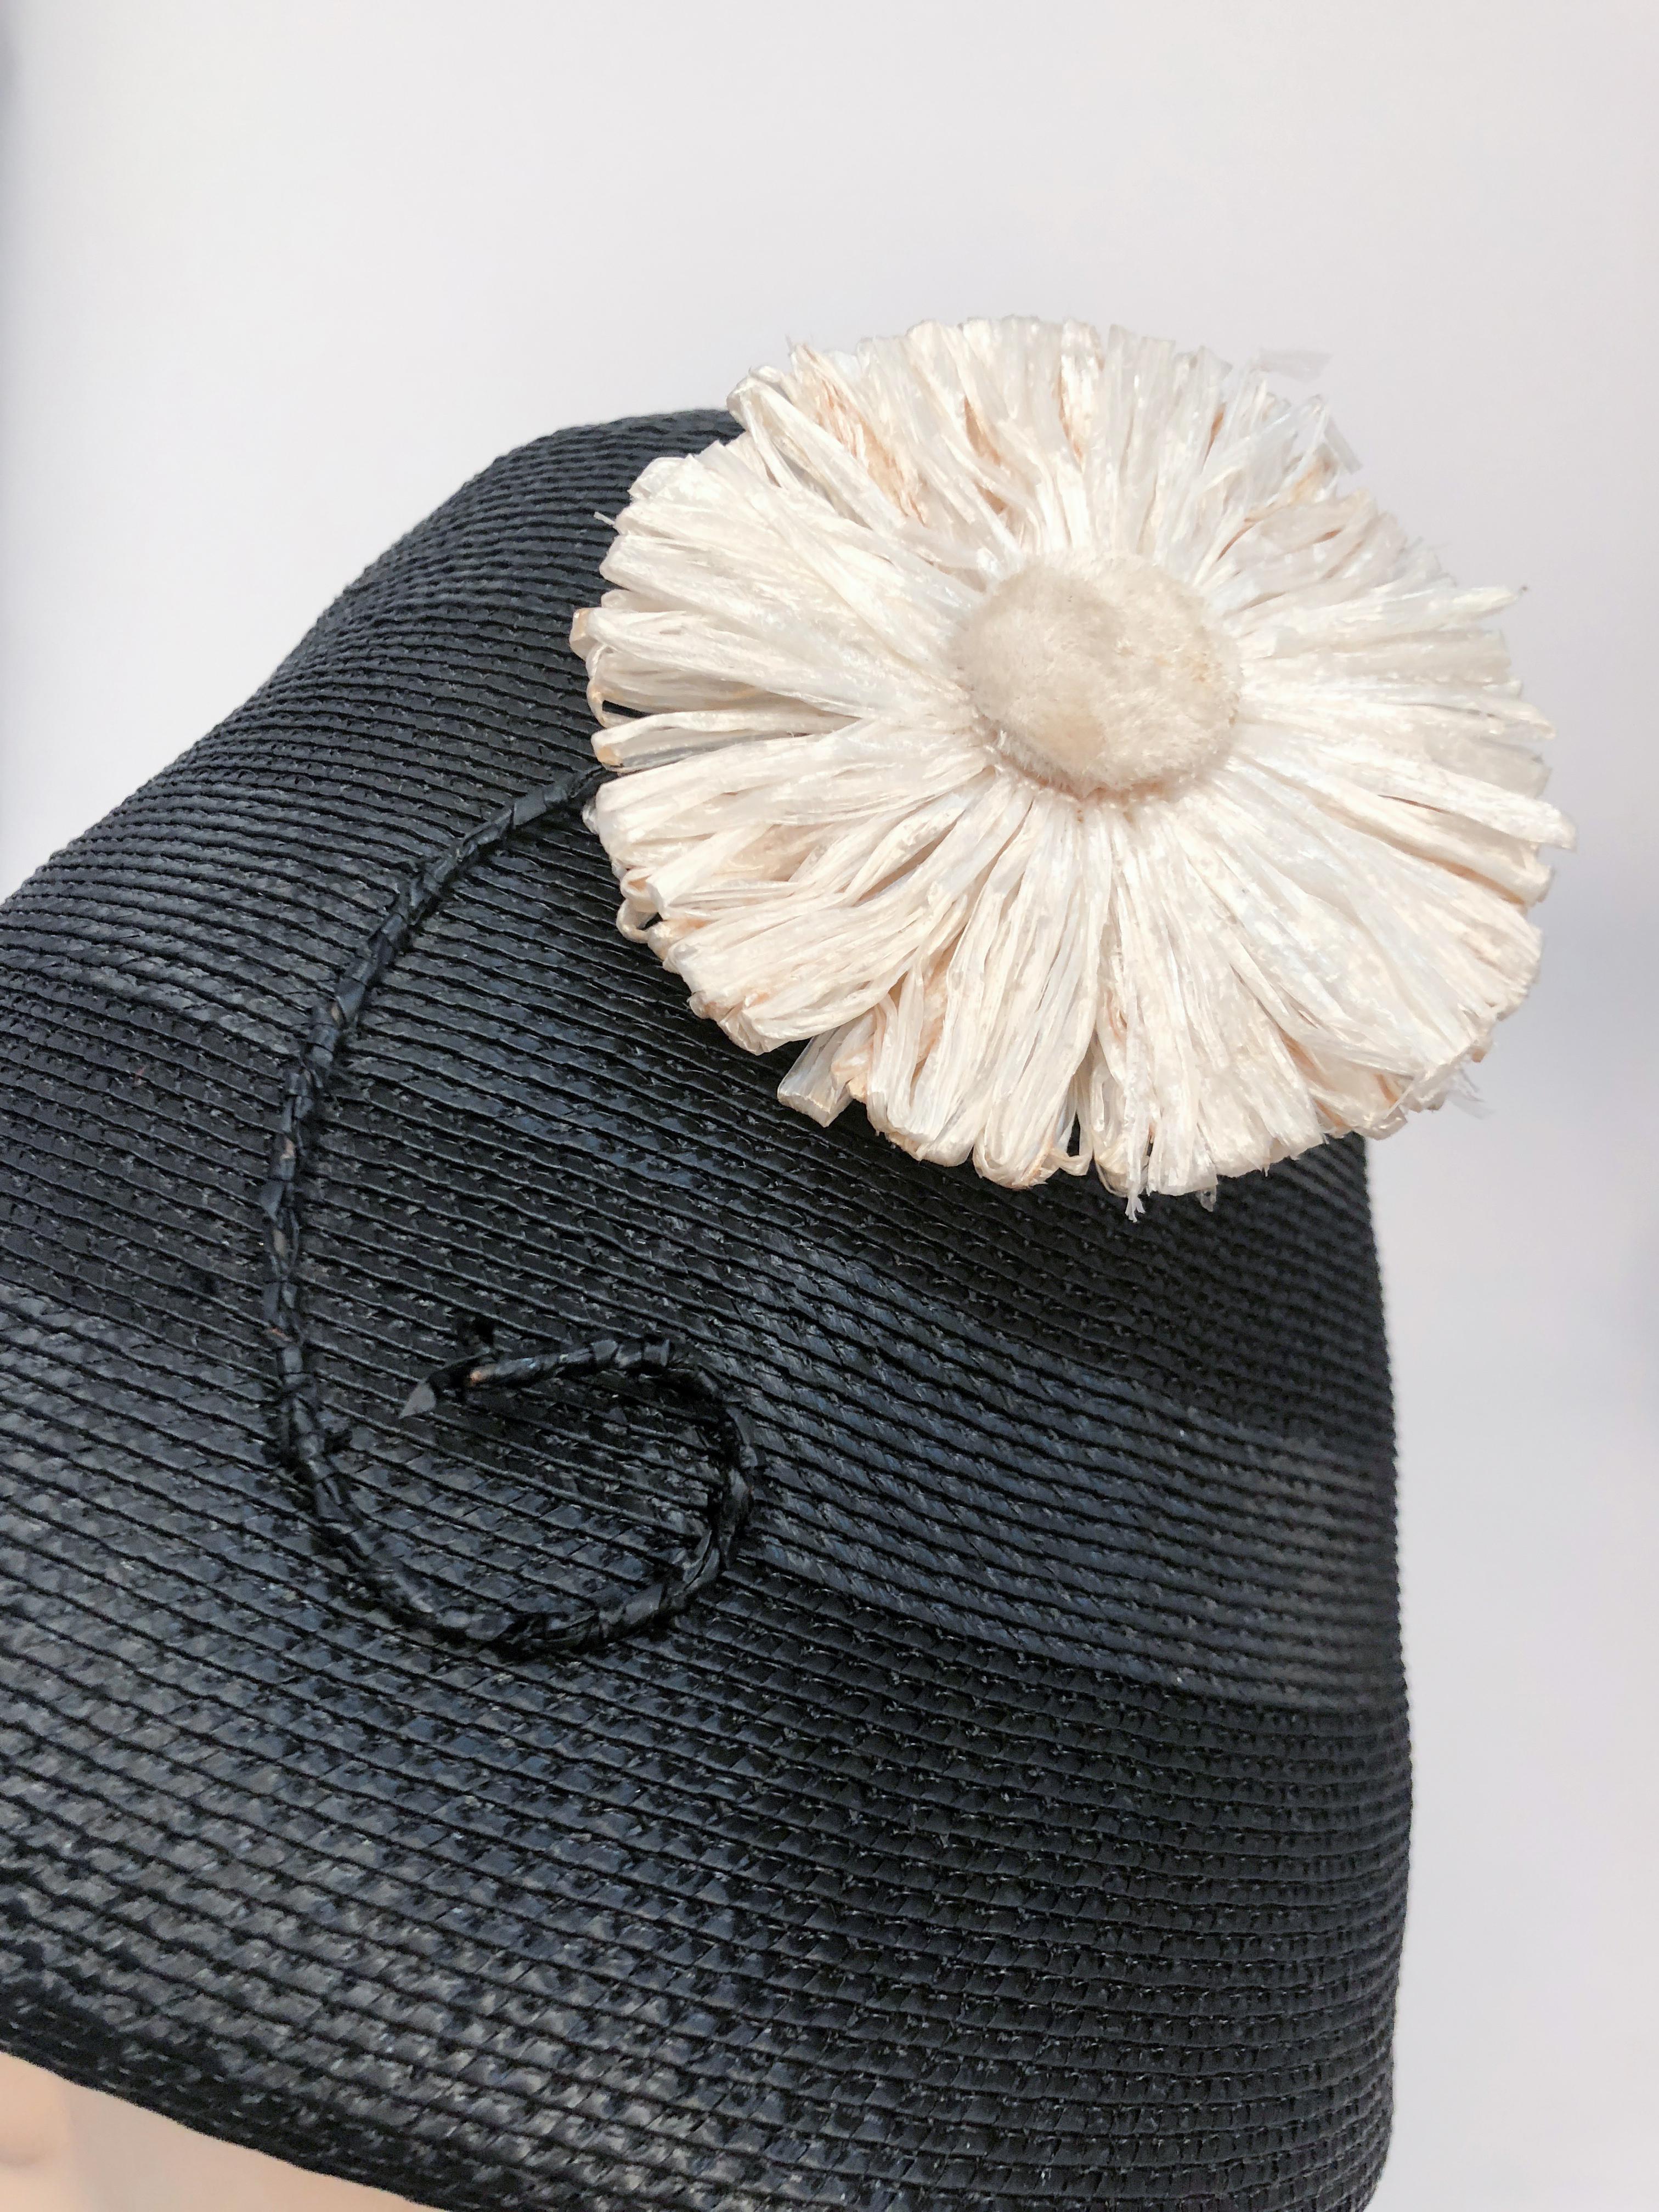 1960s Black Woven Straw Cloche Hat with Decorative Whimsical Daisy 1